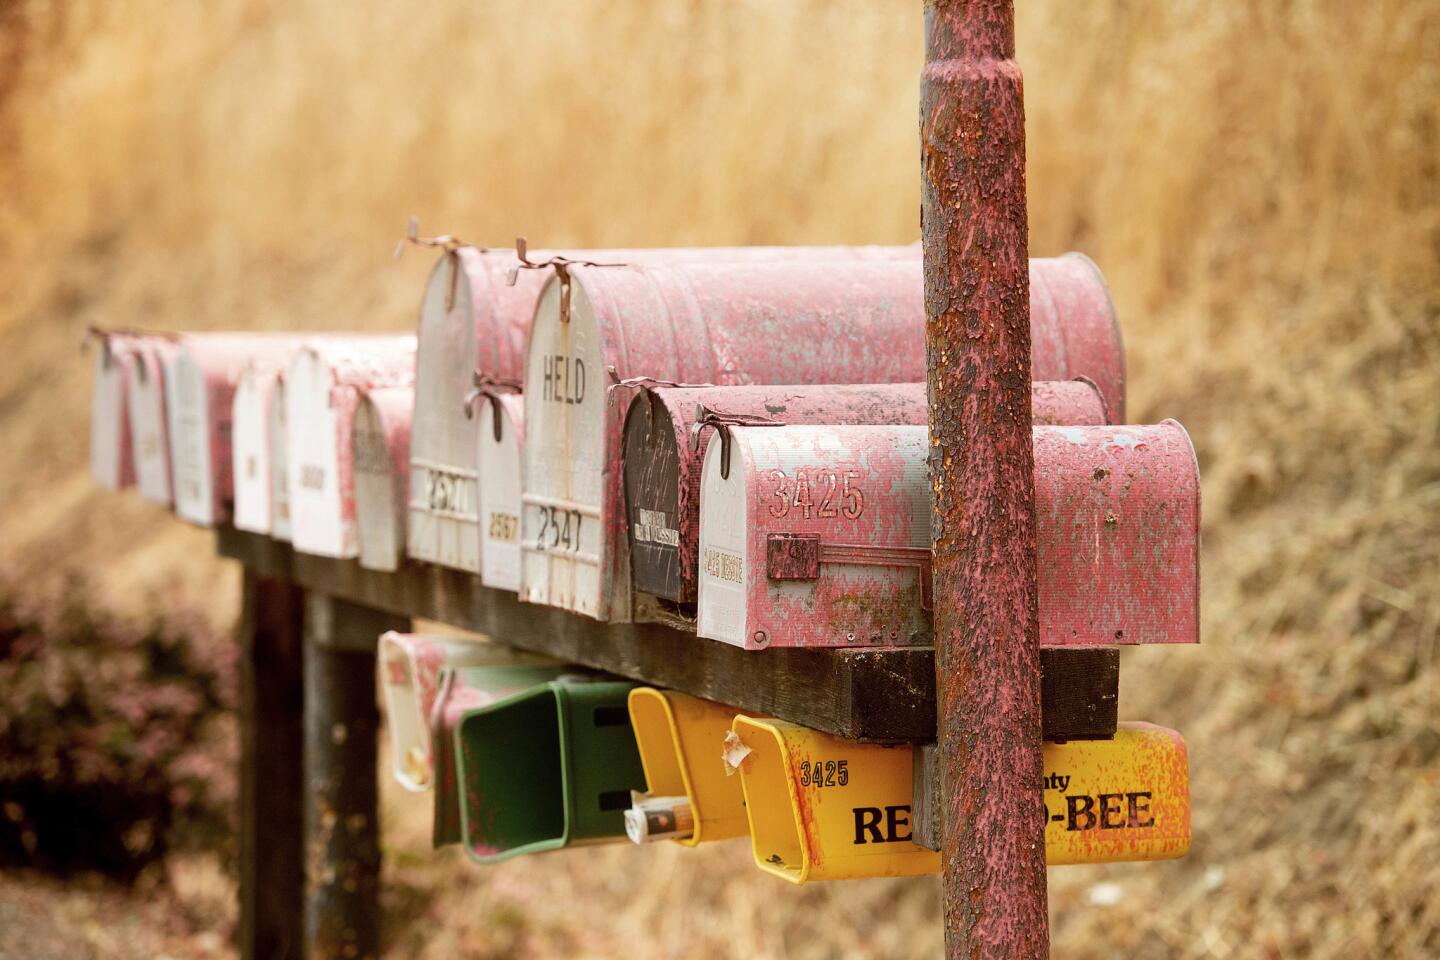 Fire retardant covers mailboxes in Lakeport, Calif., as crews work to contain the Mendocino Complex Fire on Wednesday, Aug. 8, 2018. Firefighters said Wednesday that they have made good progress battling the state's largest-ever wildfire but didn't expect to have it fully under control until September.